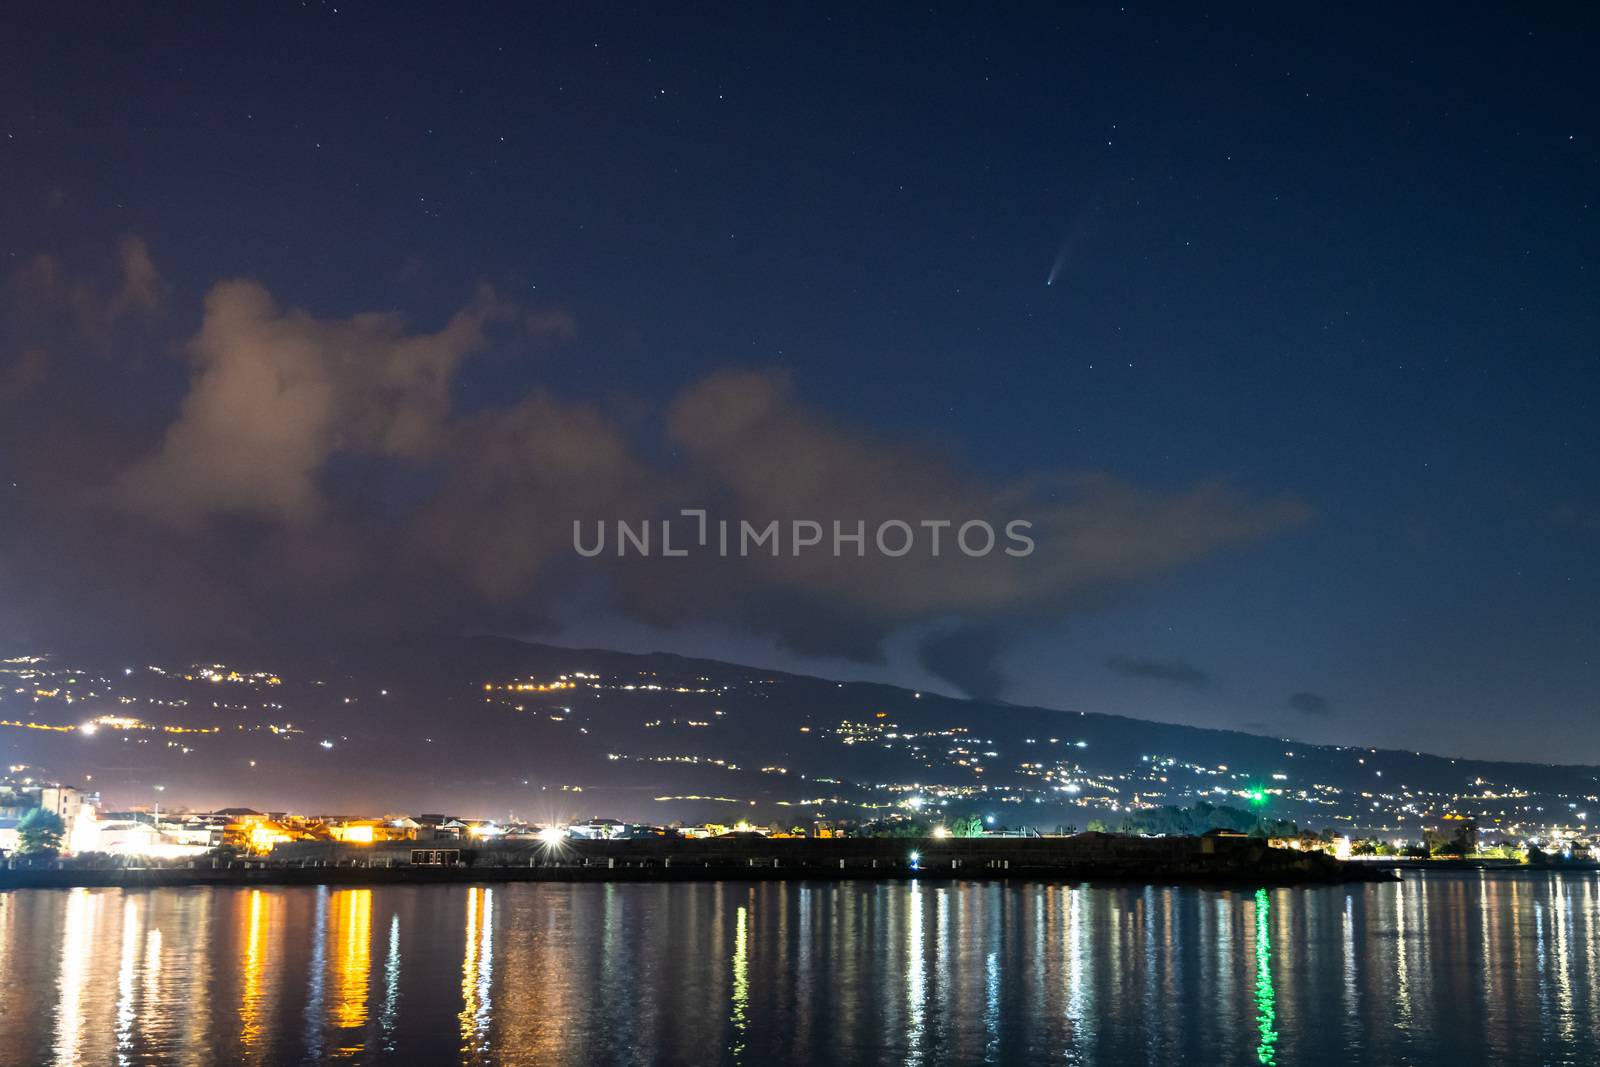 Neowise Comet and its tail from illuminated Riposto harbour near Etna volcano, Sicily, Italy